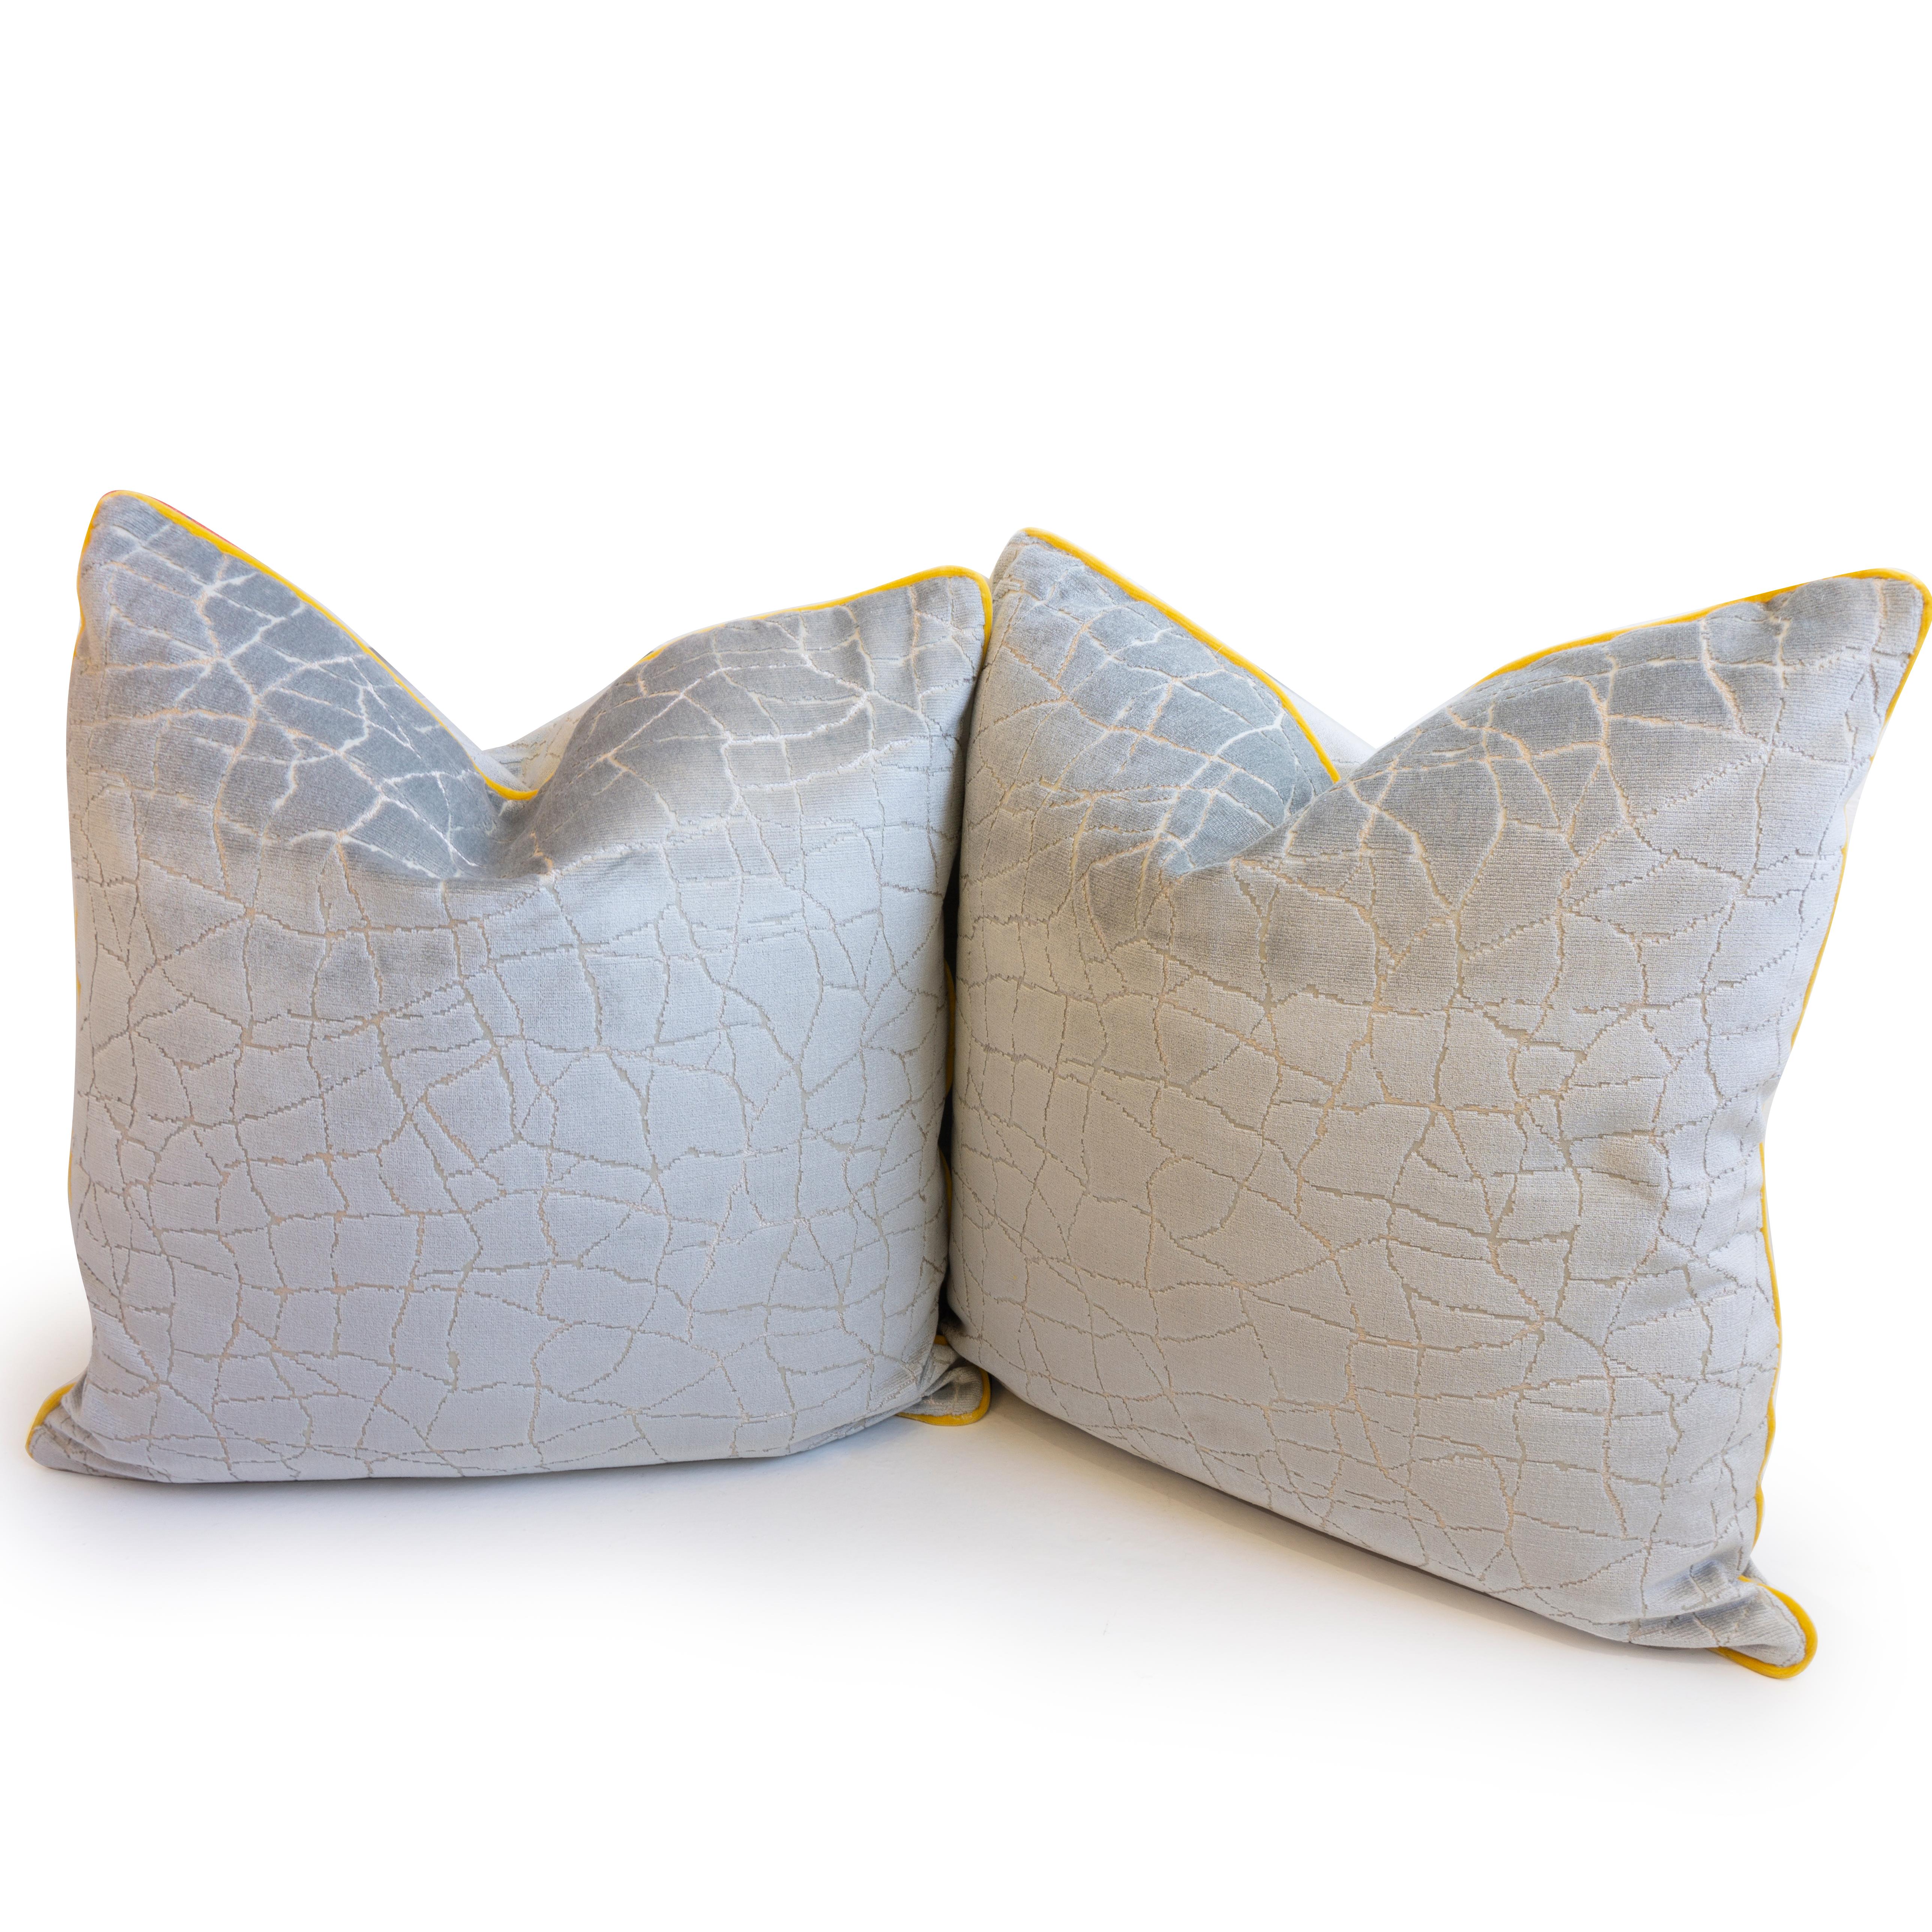 A hand sewn throw pillow made in a cut velvet fabric with 